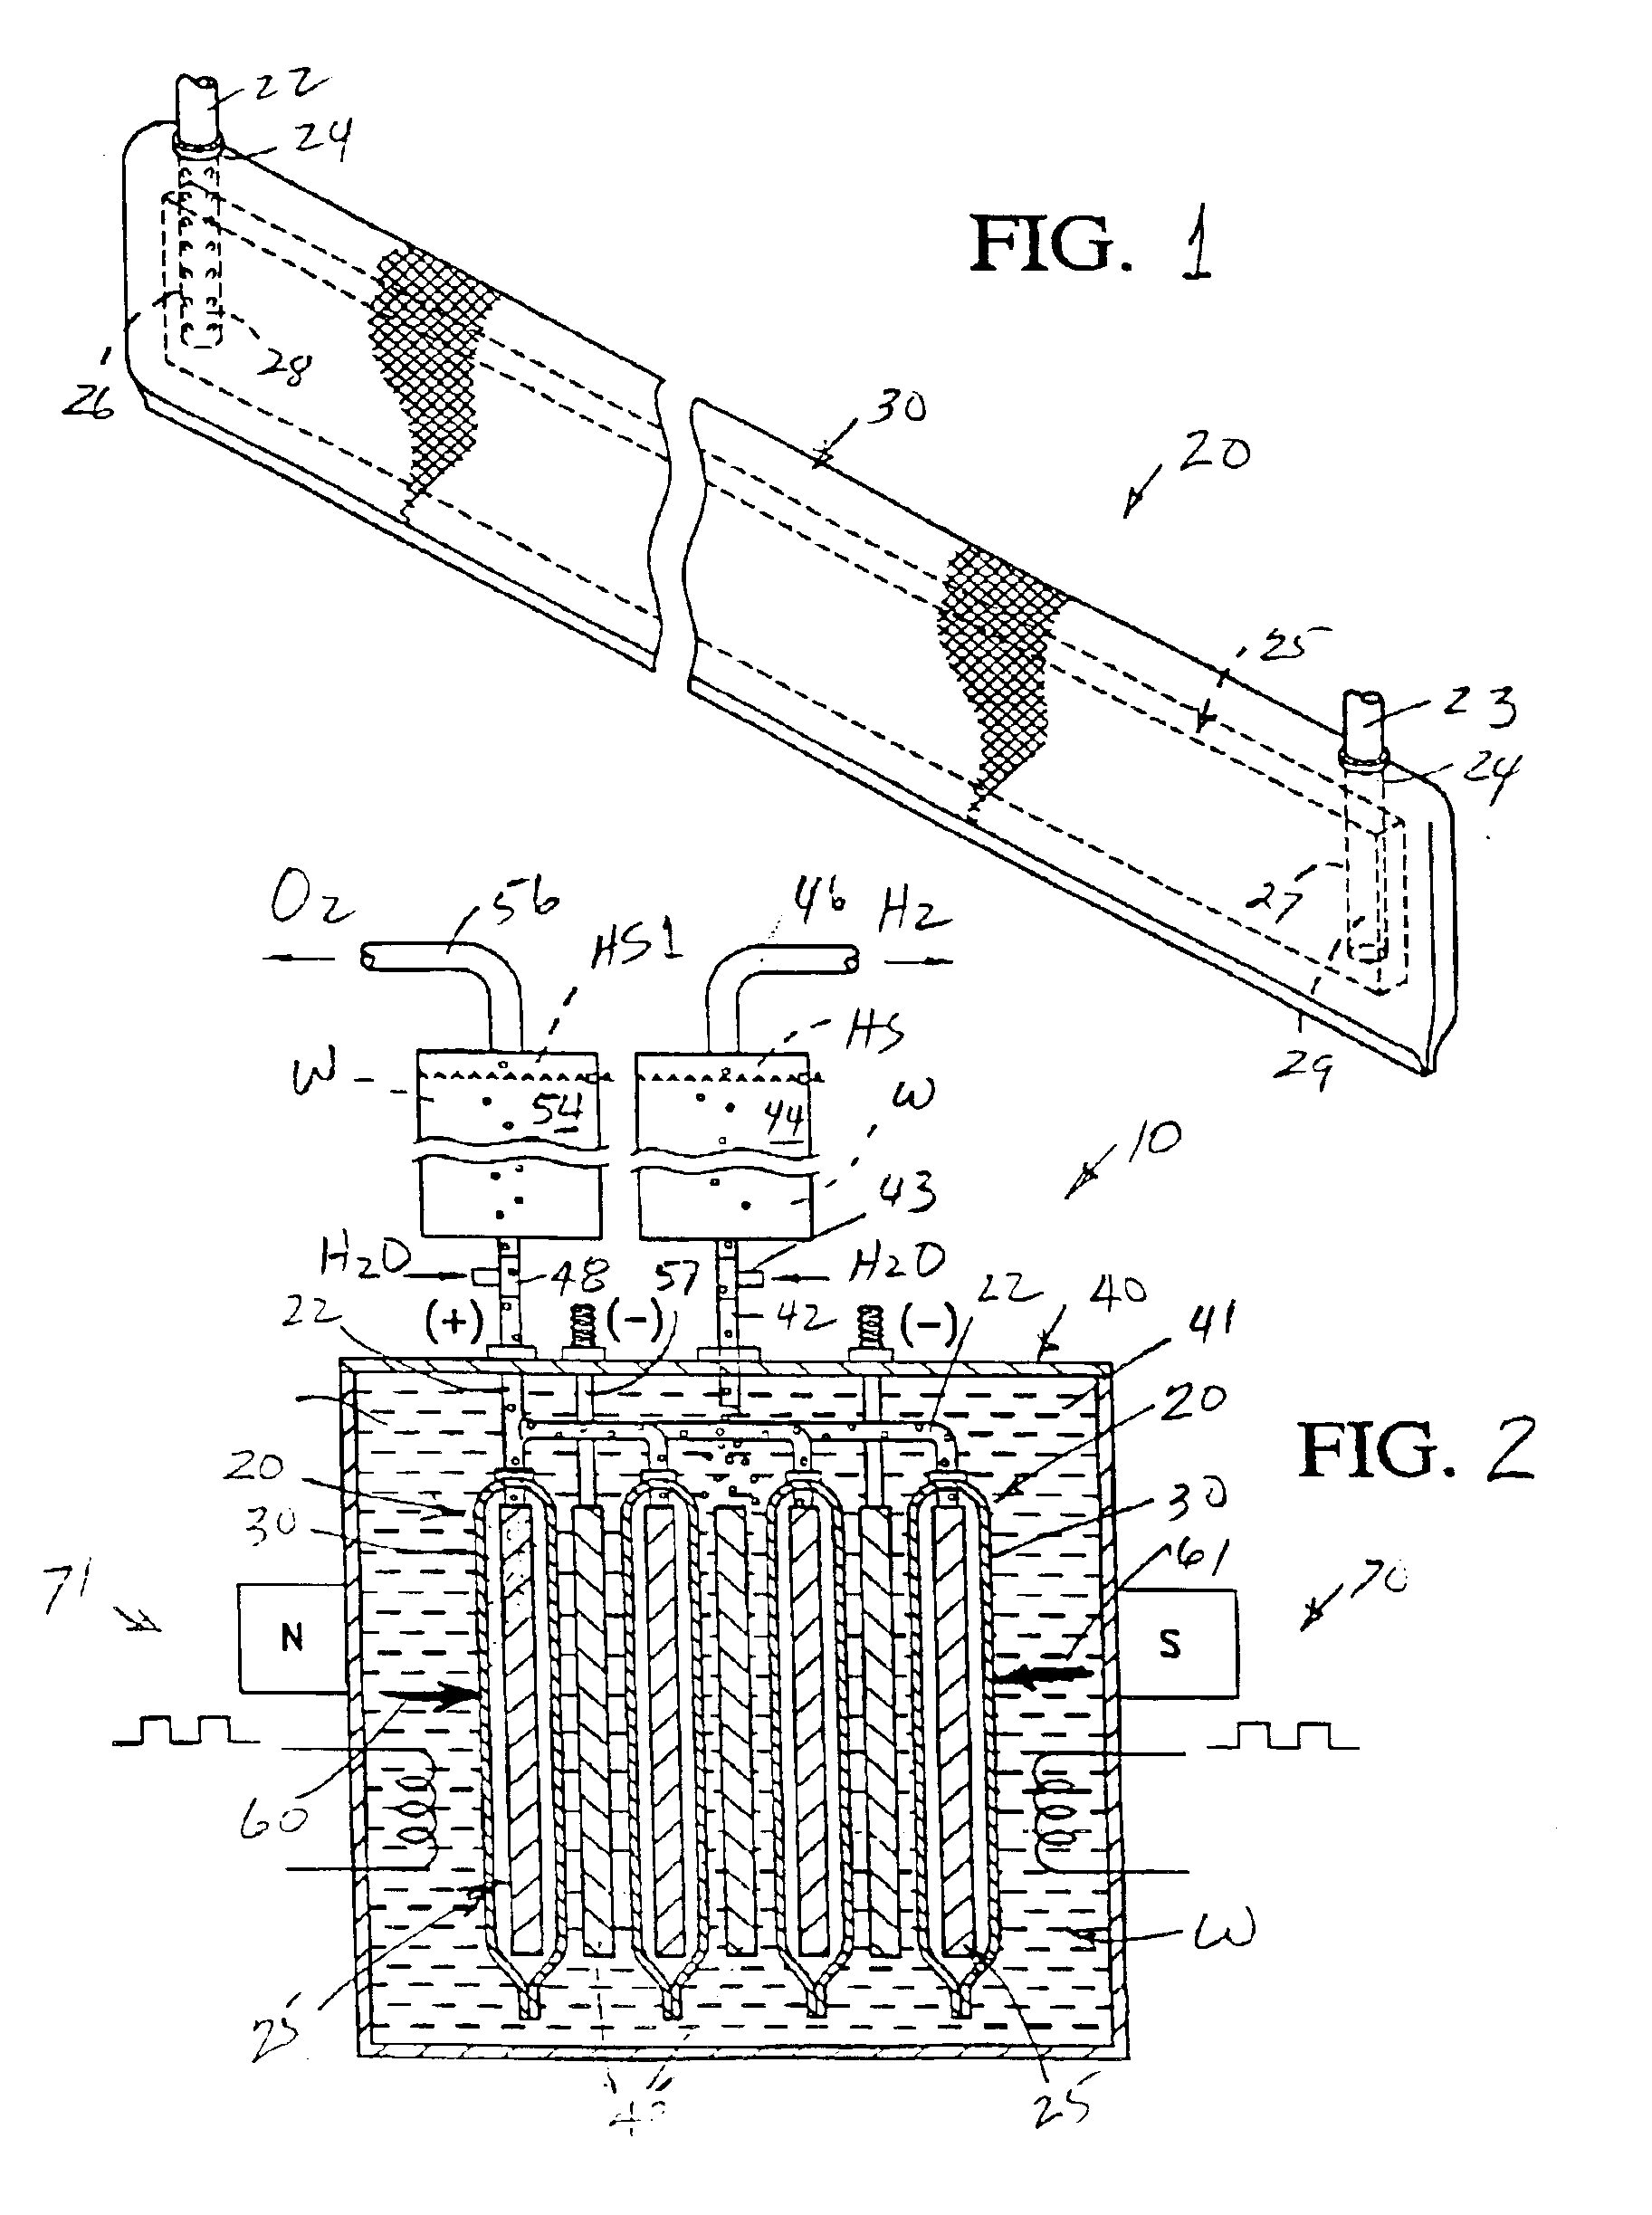 Apparatus for converting a fluid into at least two gasses through electrolysis